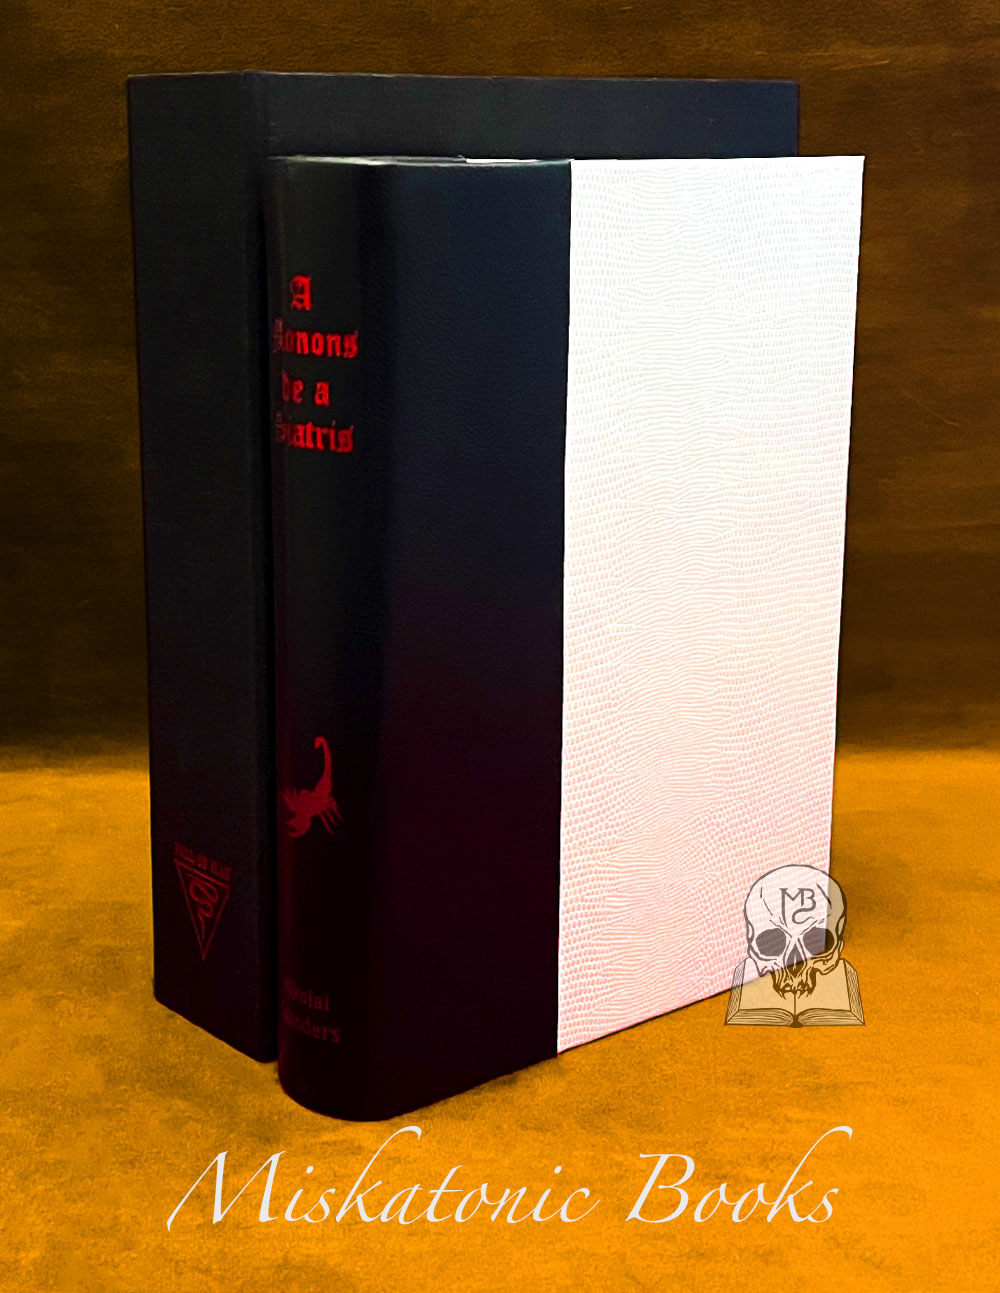 A Monons de a Siatris: The Heart of the Scorpion by Nikolai Saunders - Deluxe Bound in Leather and Pelaq Lizard in Custom Traycase